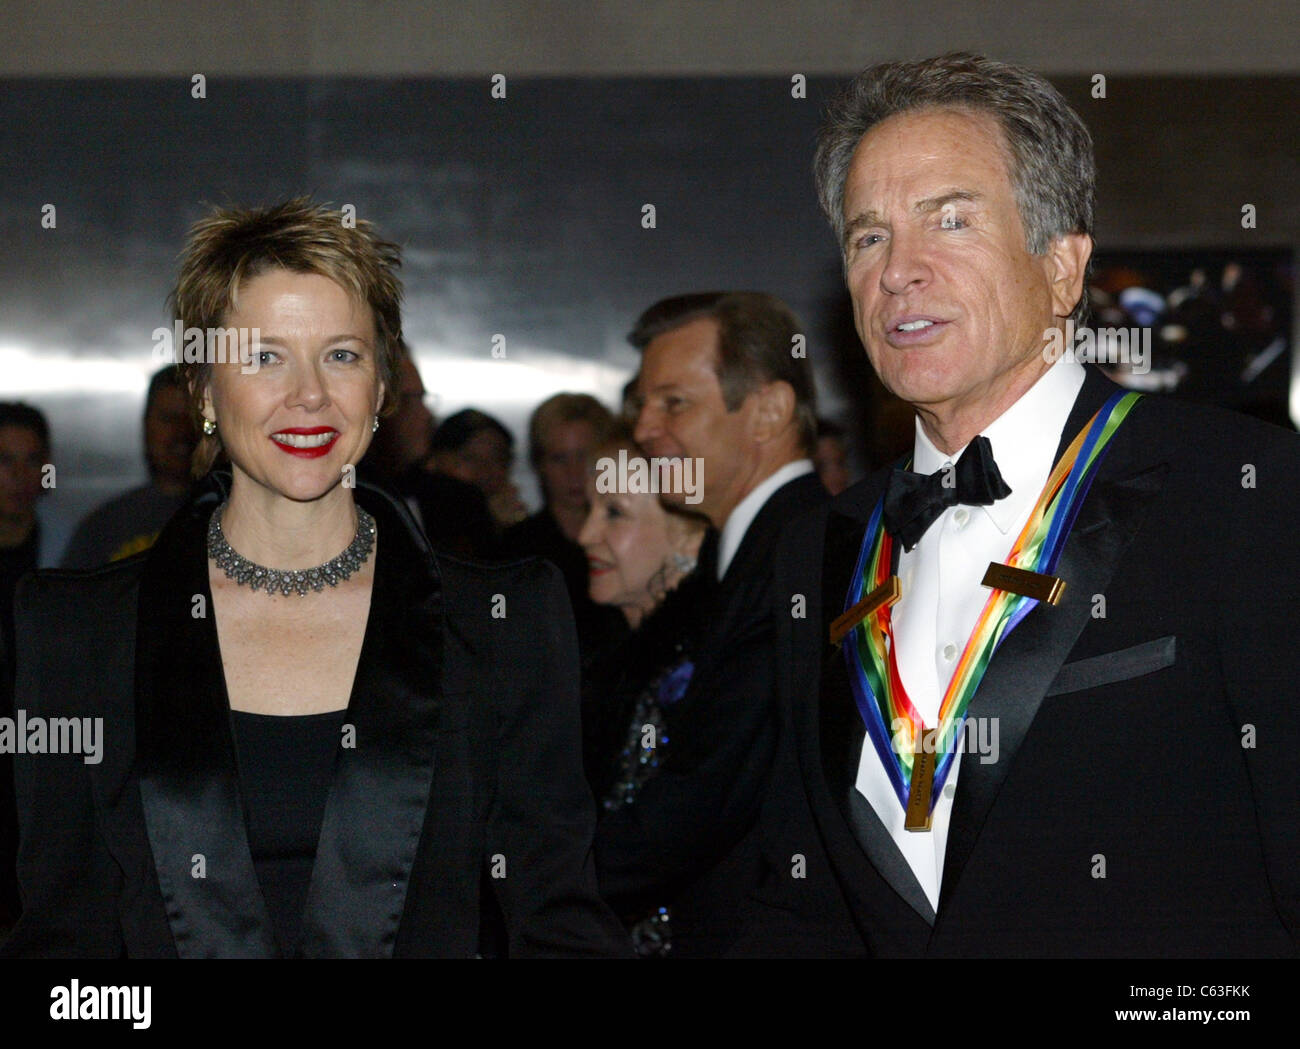 Warren Beatty and his wife Annette Bening arrive for the 27TH ANNUAL KENNEDY CENTER HONORS at the Kennedy Center December 5, 2004 in Washington, D.C. (Photo by Yuri Gripas/Everett Collection) Stock Photo